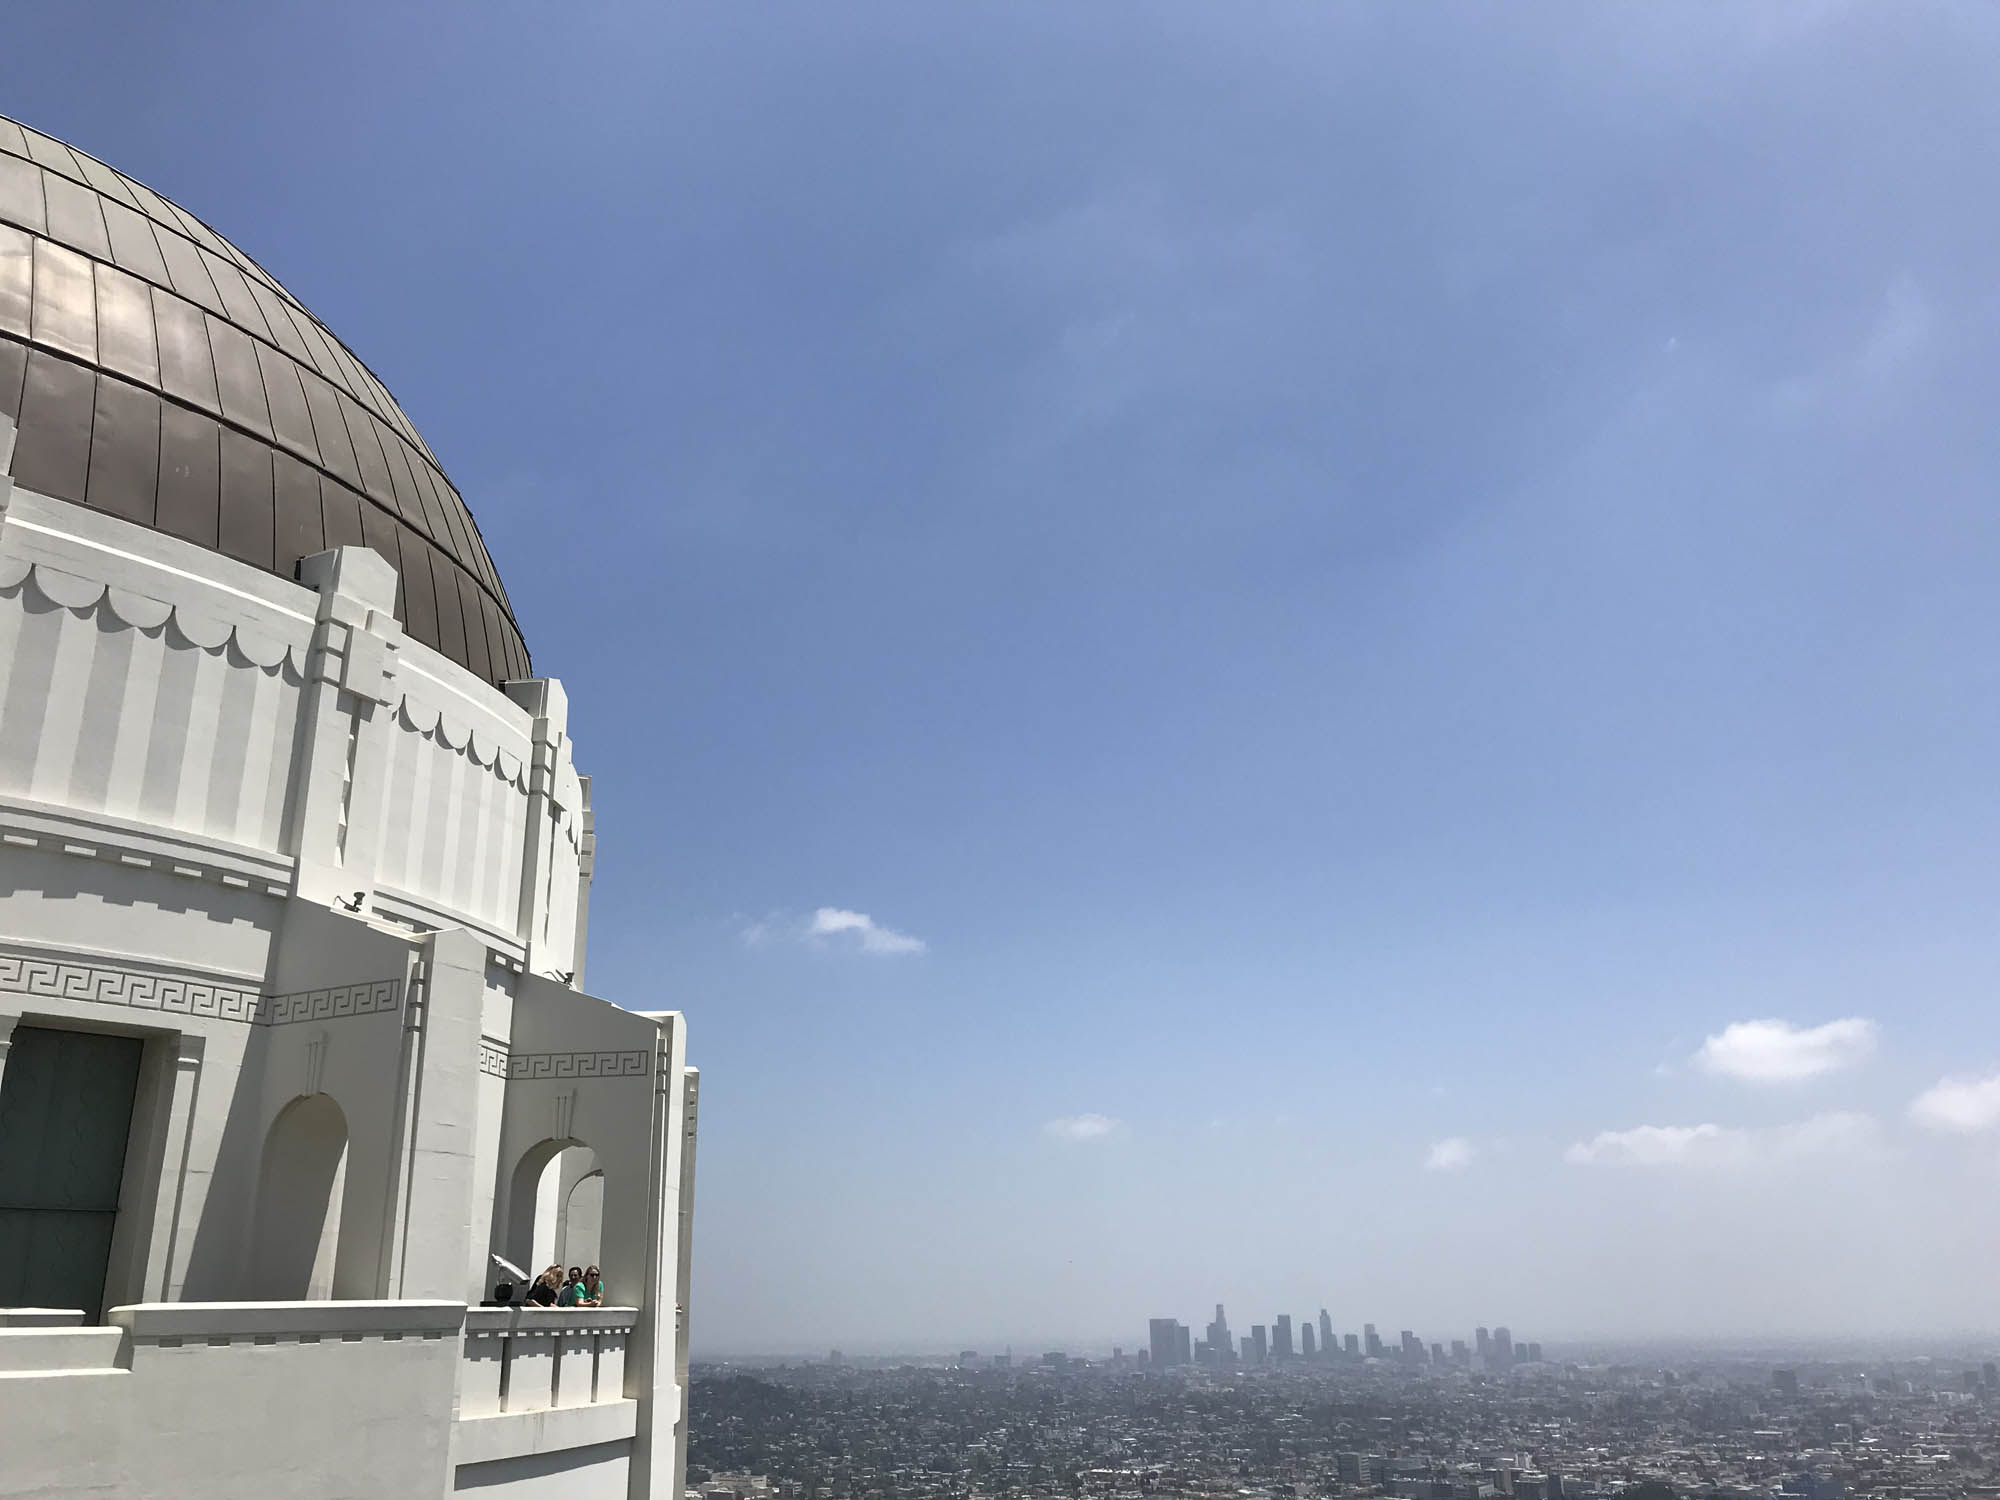 Griffith Observatory Building